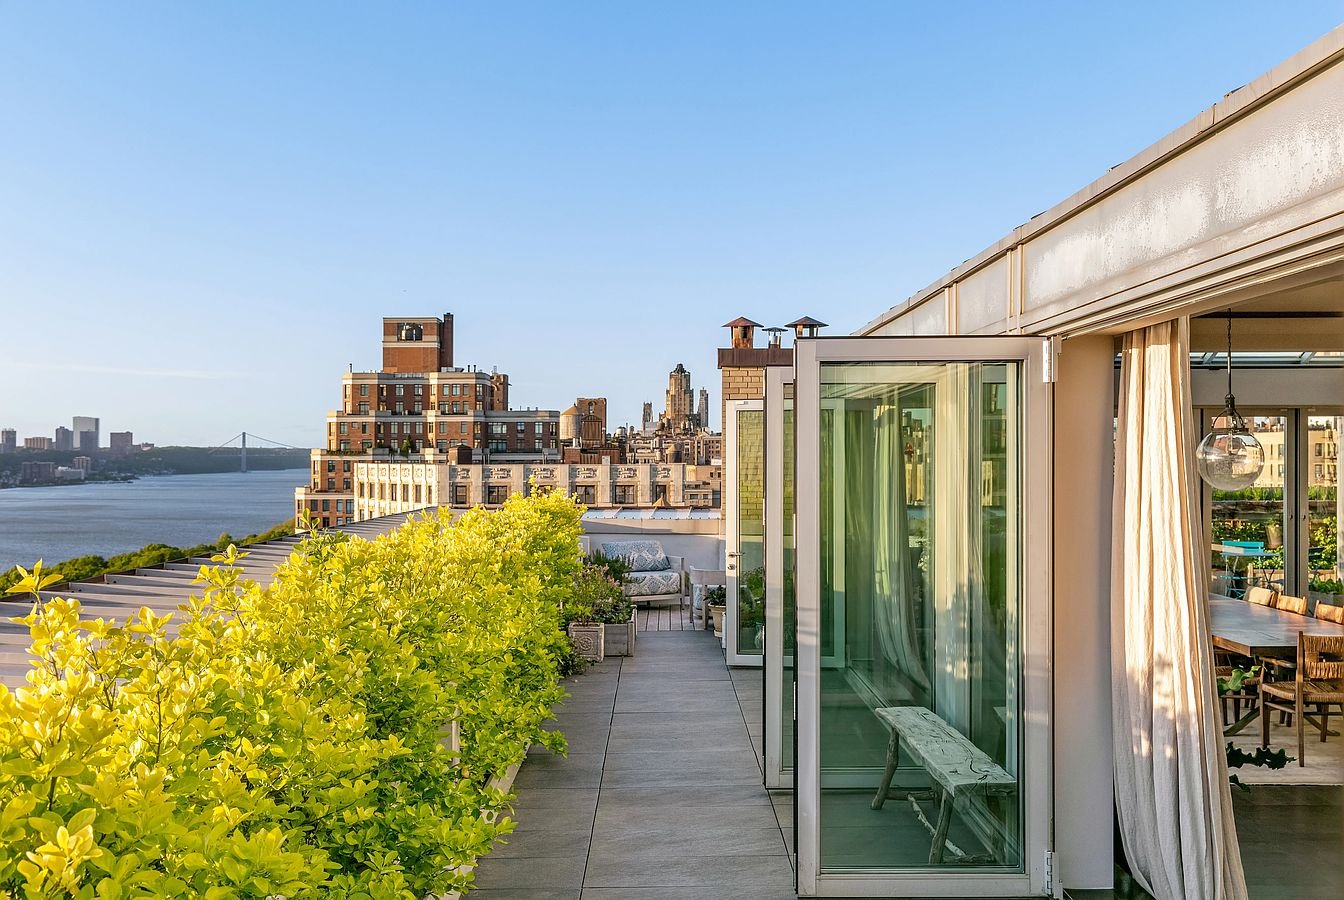 Francis York $15,000,000 NYC Penthouse With 360° View 7.jpg